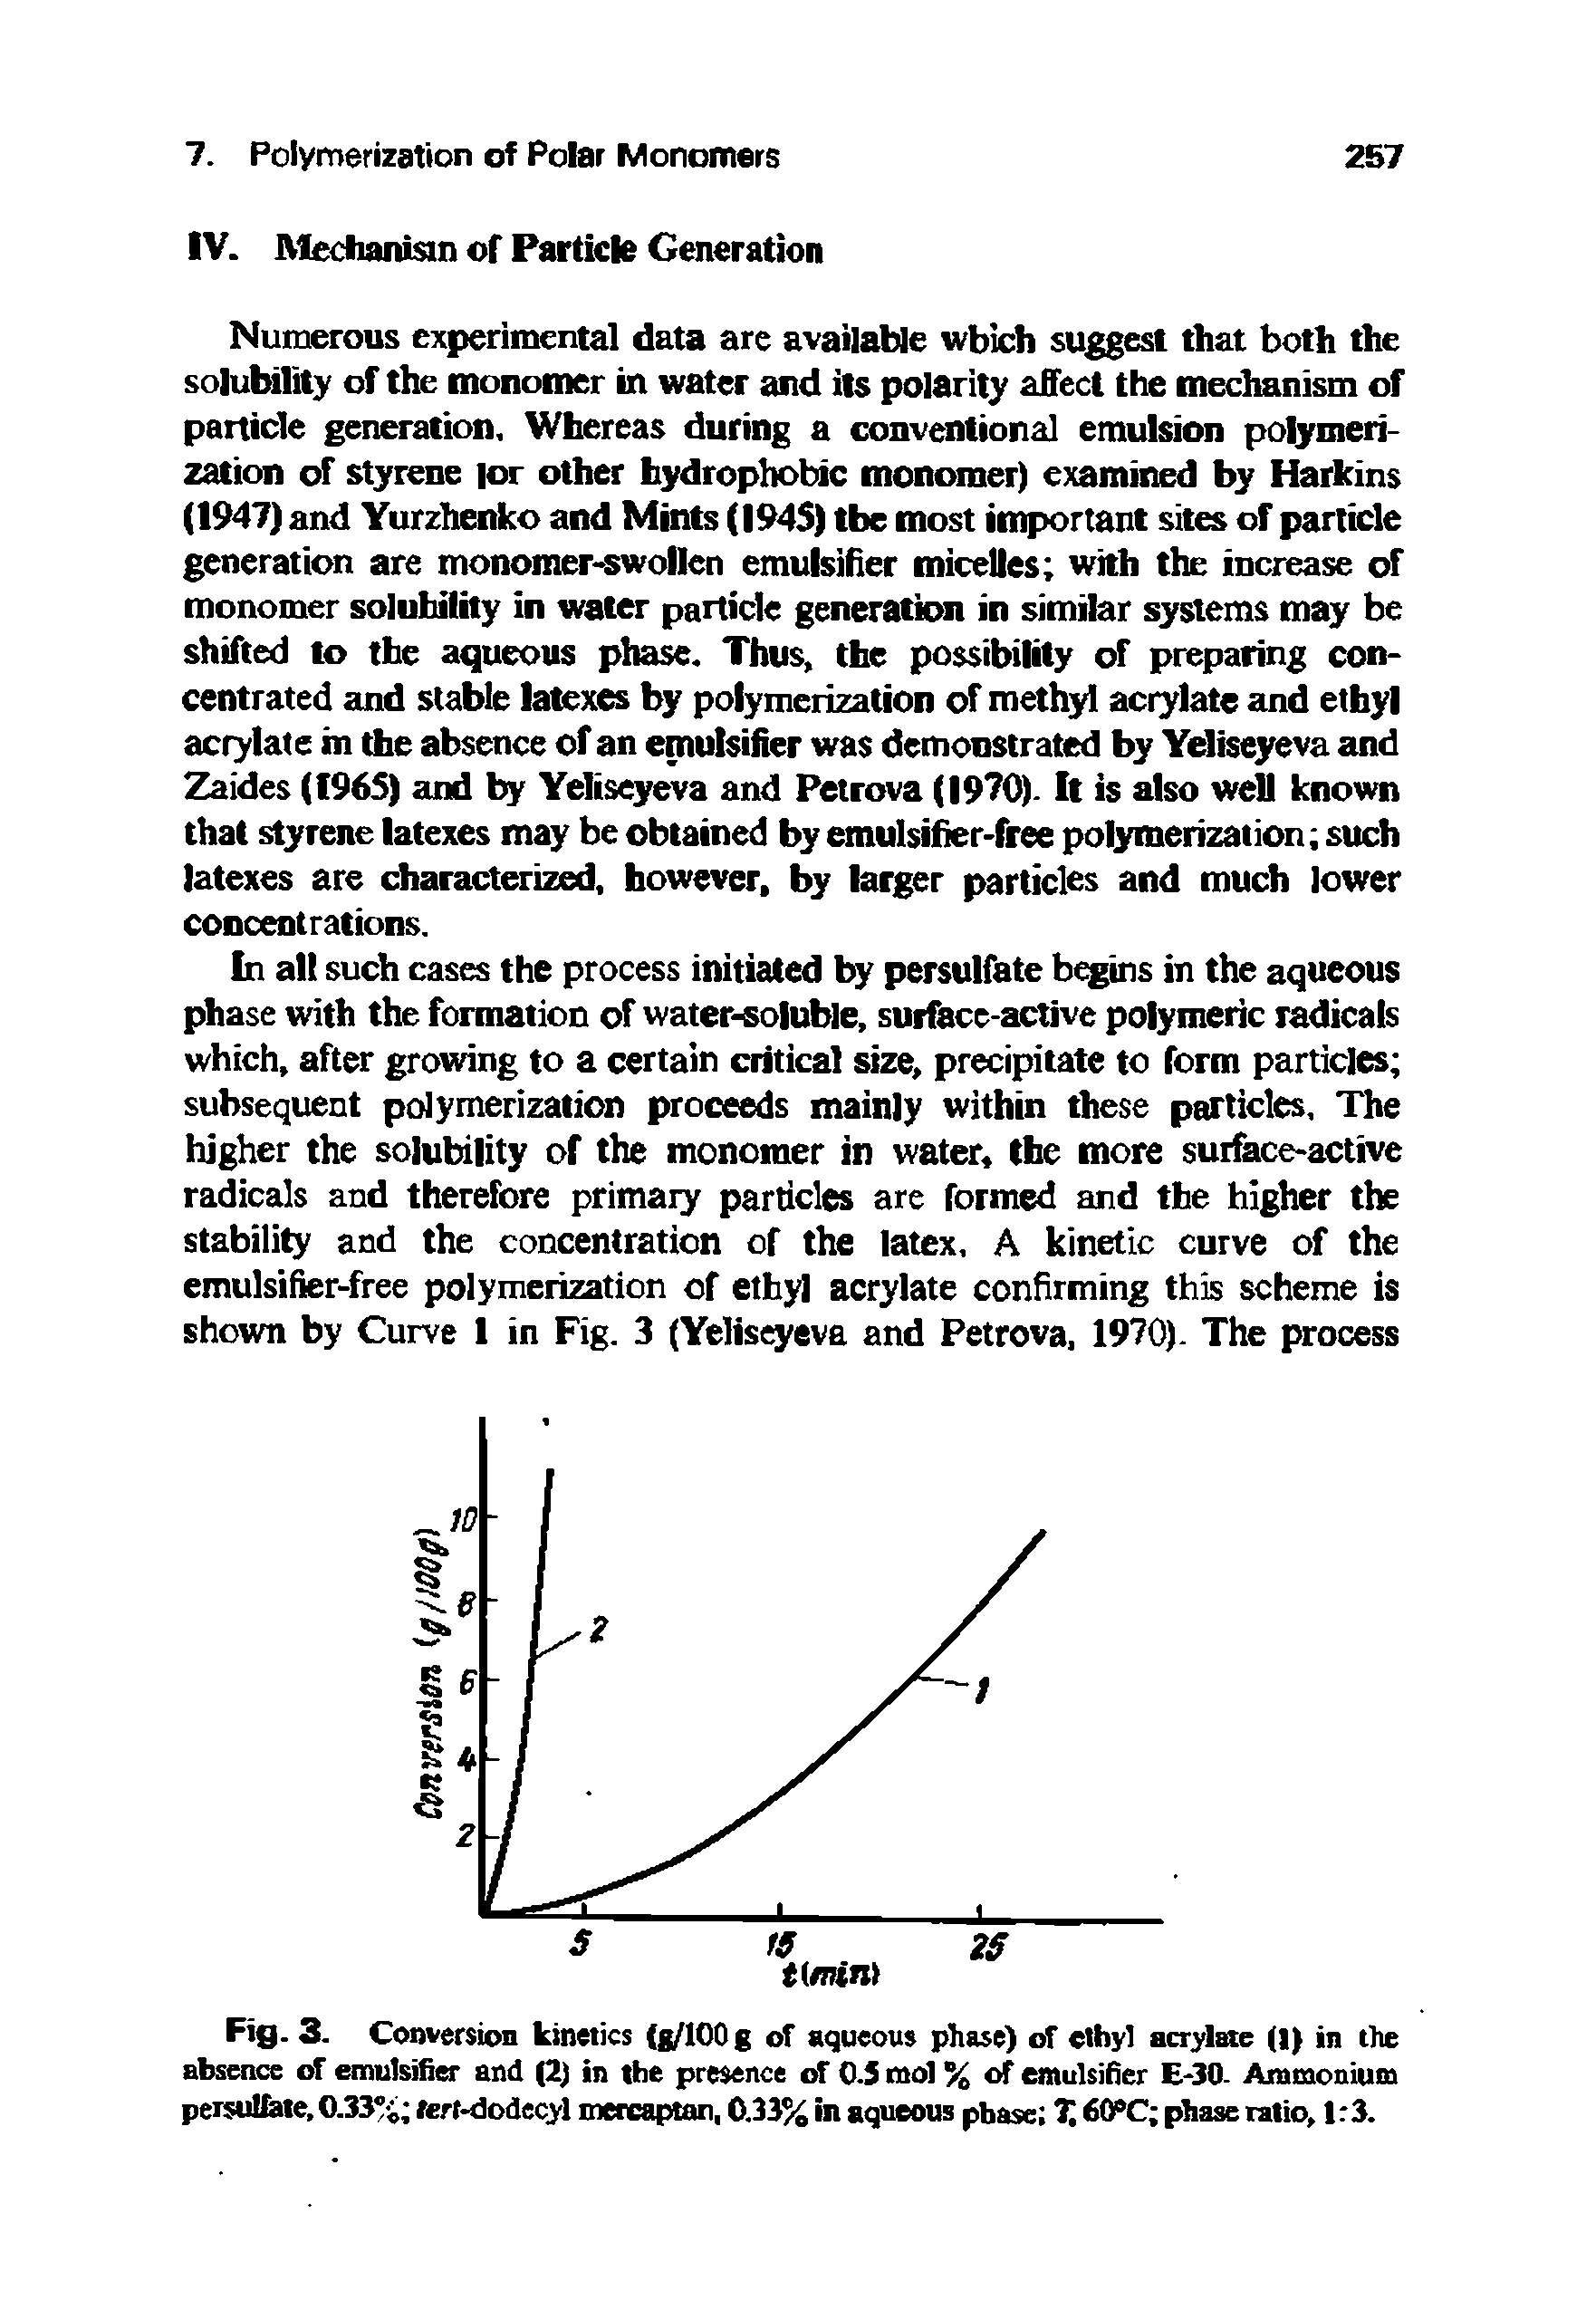 Fig. 3. Conversion kinetics (g/lOOg of aqueous phase) of ethyl acrylate (I) in the absence of emulsifier and (2) in the presence of 0.S mol % of emulsifier E-30- Ammonium peisu fete,0.33% tert-dodecyl metcaptan, 0.33% in aqueous phase T, 6tPC phase ratio, 1 3.